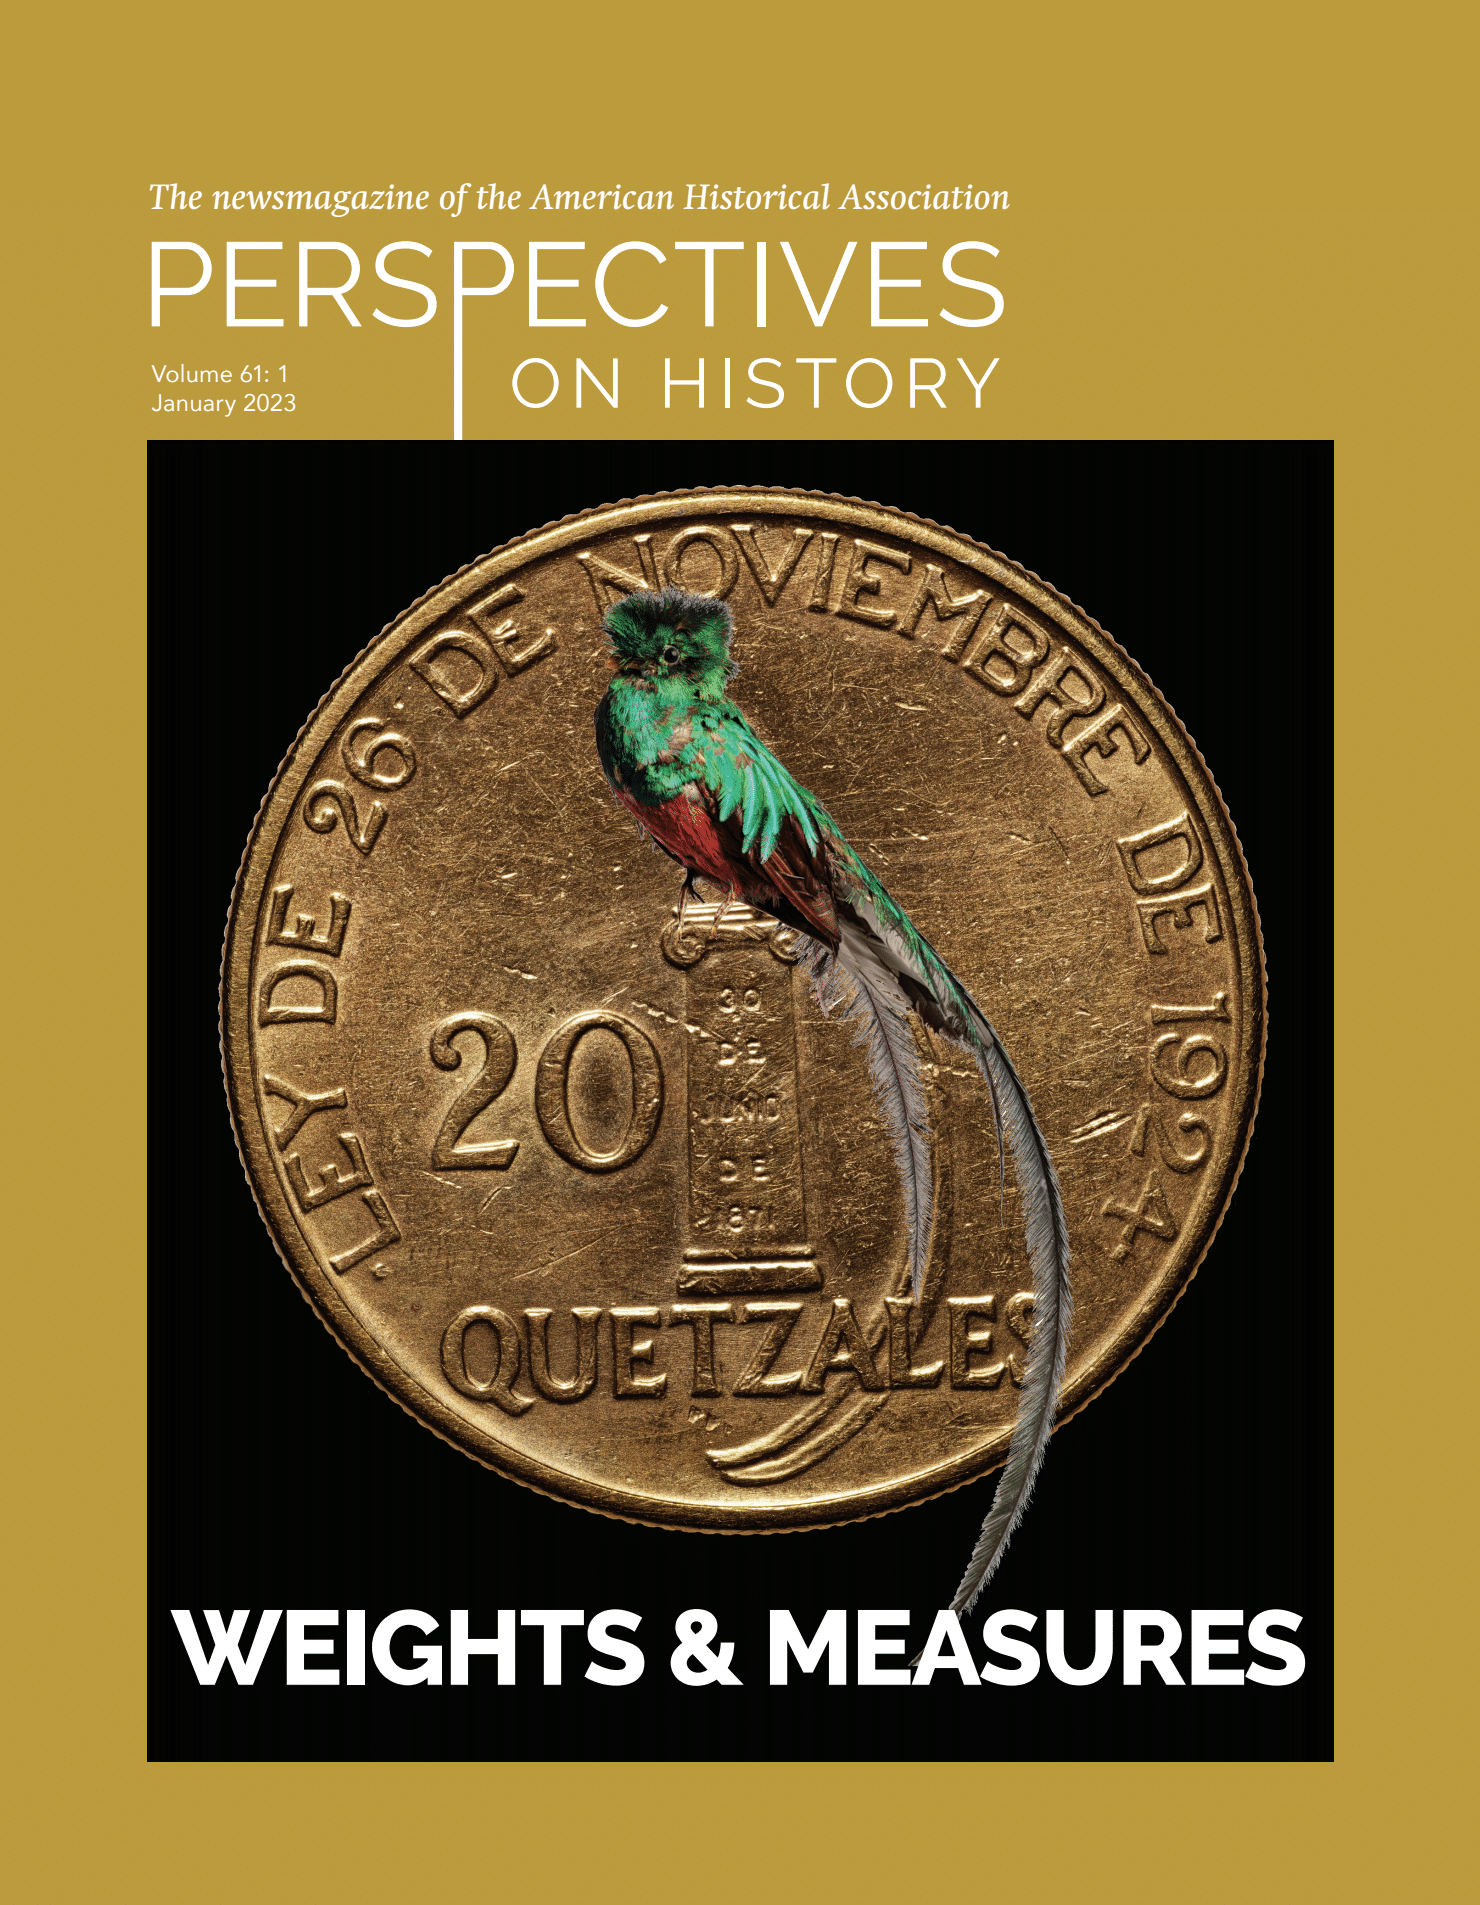 Perspectives on History January 2023 Cover.